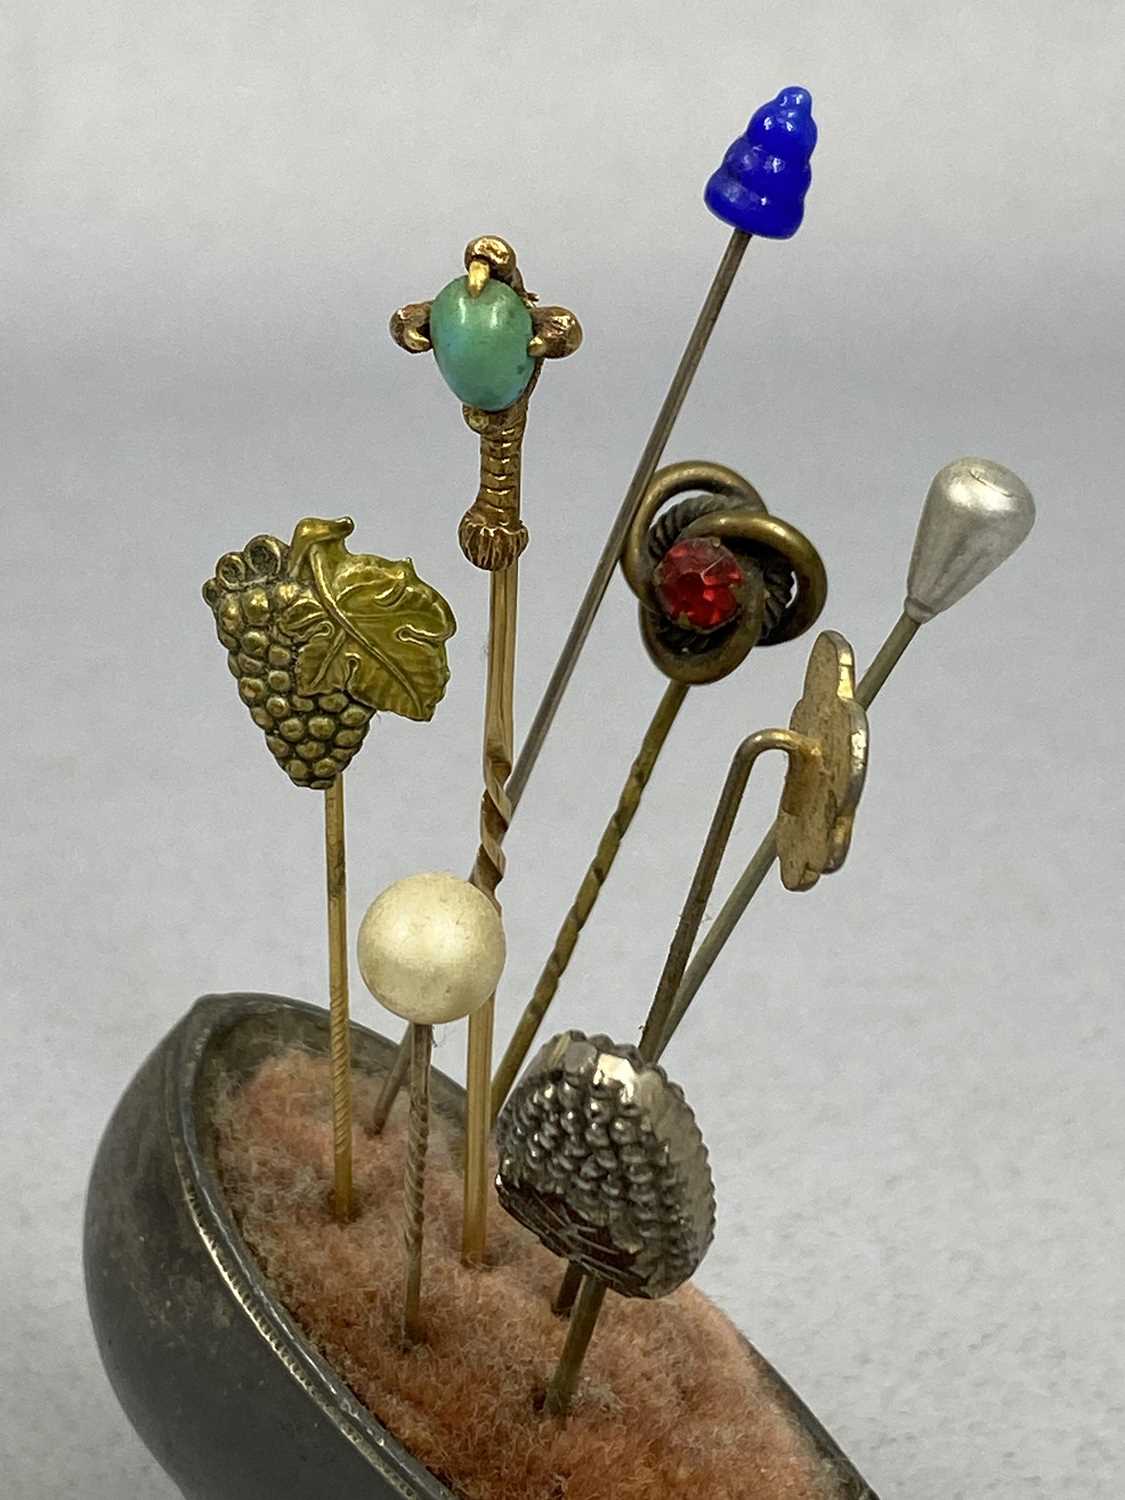 COLLECTION OF VINTAGE HAT PINS, some with shell/hardstone mounts, with an embroidered silk pin - Image 2 of 5